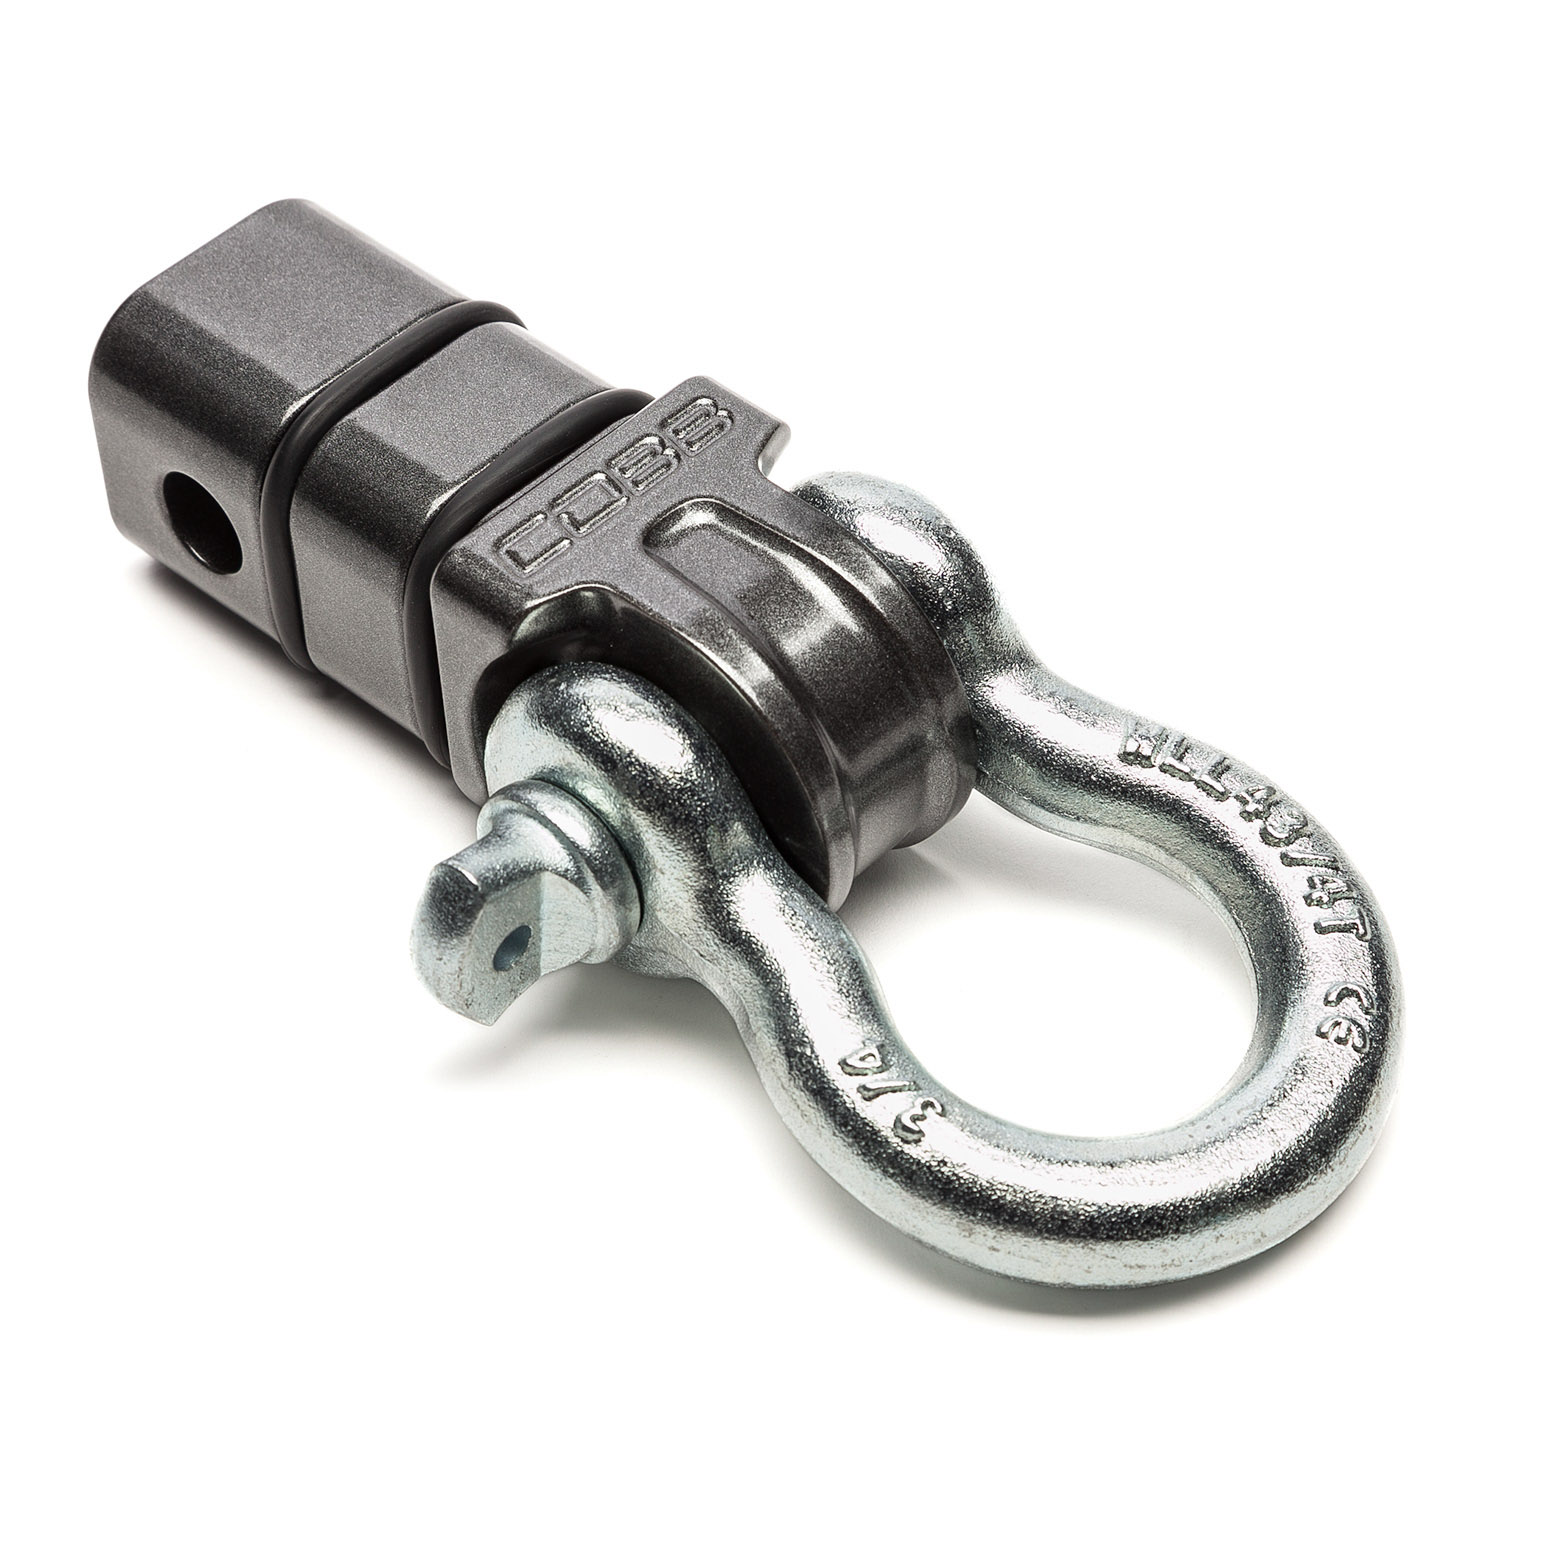 D-Ring/Shackle Mount 3 X 1 With 7/8 Hole for use with 3/4 pin